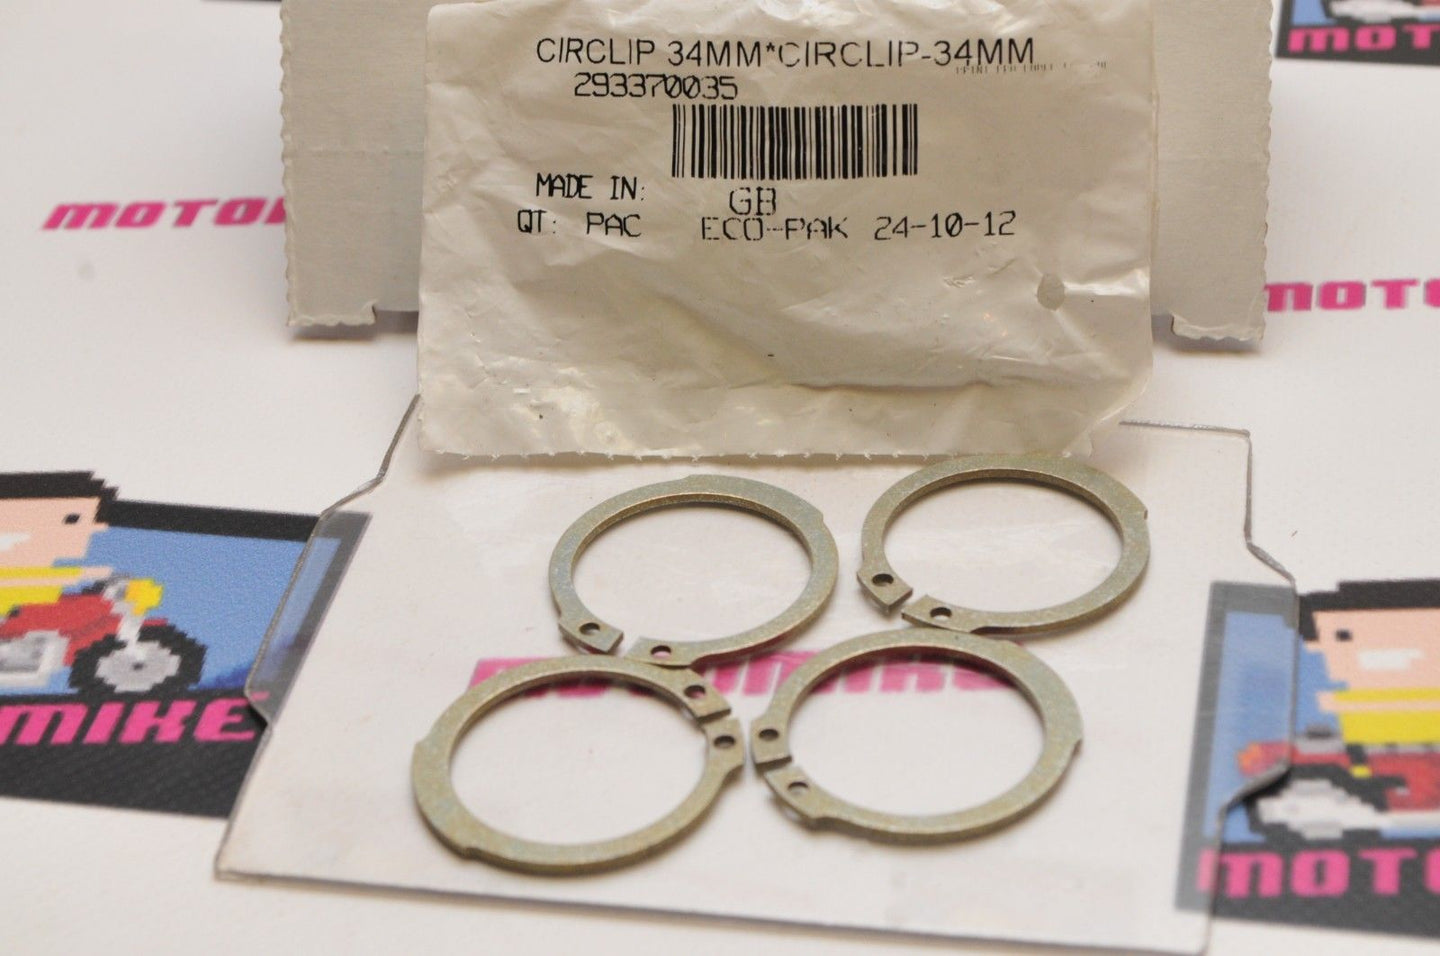 NOS NEW OEM CAN-AM 293370035 Qty:4 CIRCLIP CIRCLIPS +SKIDOO